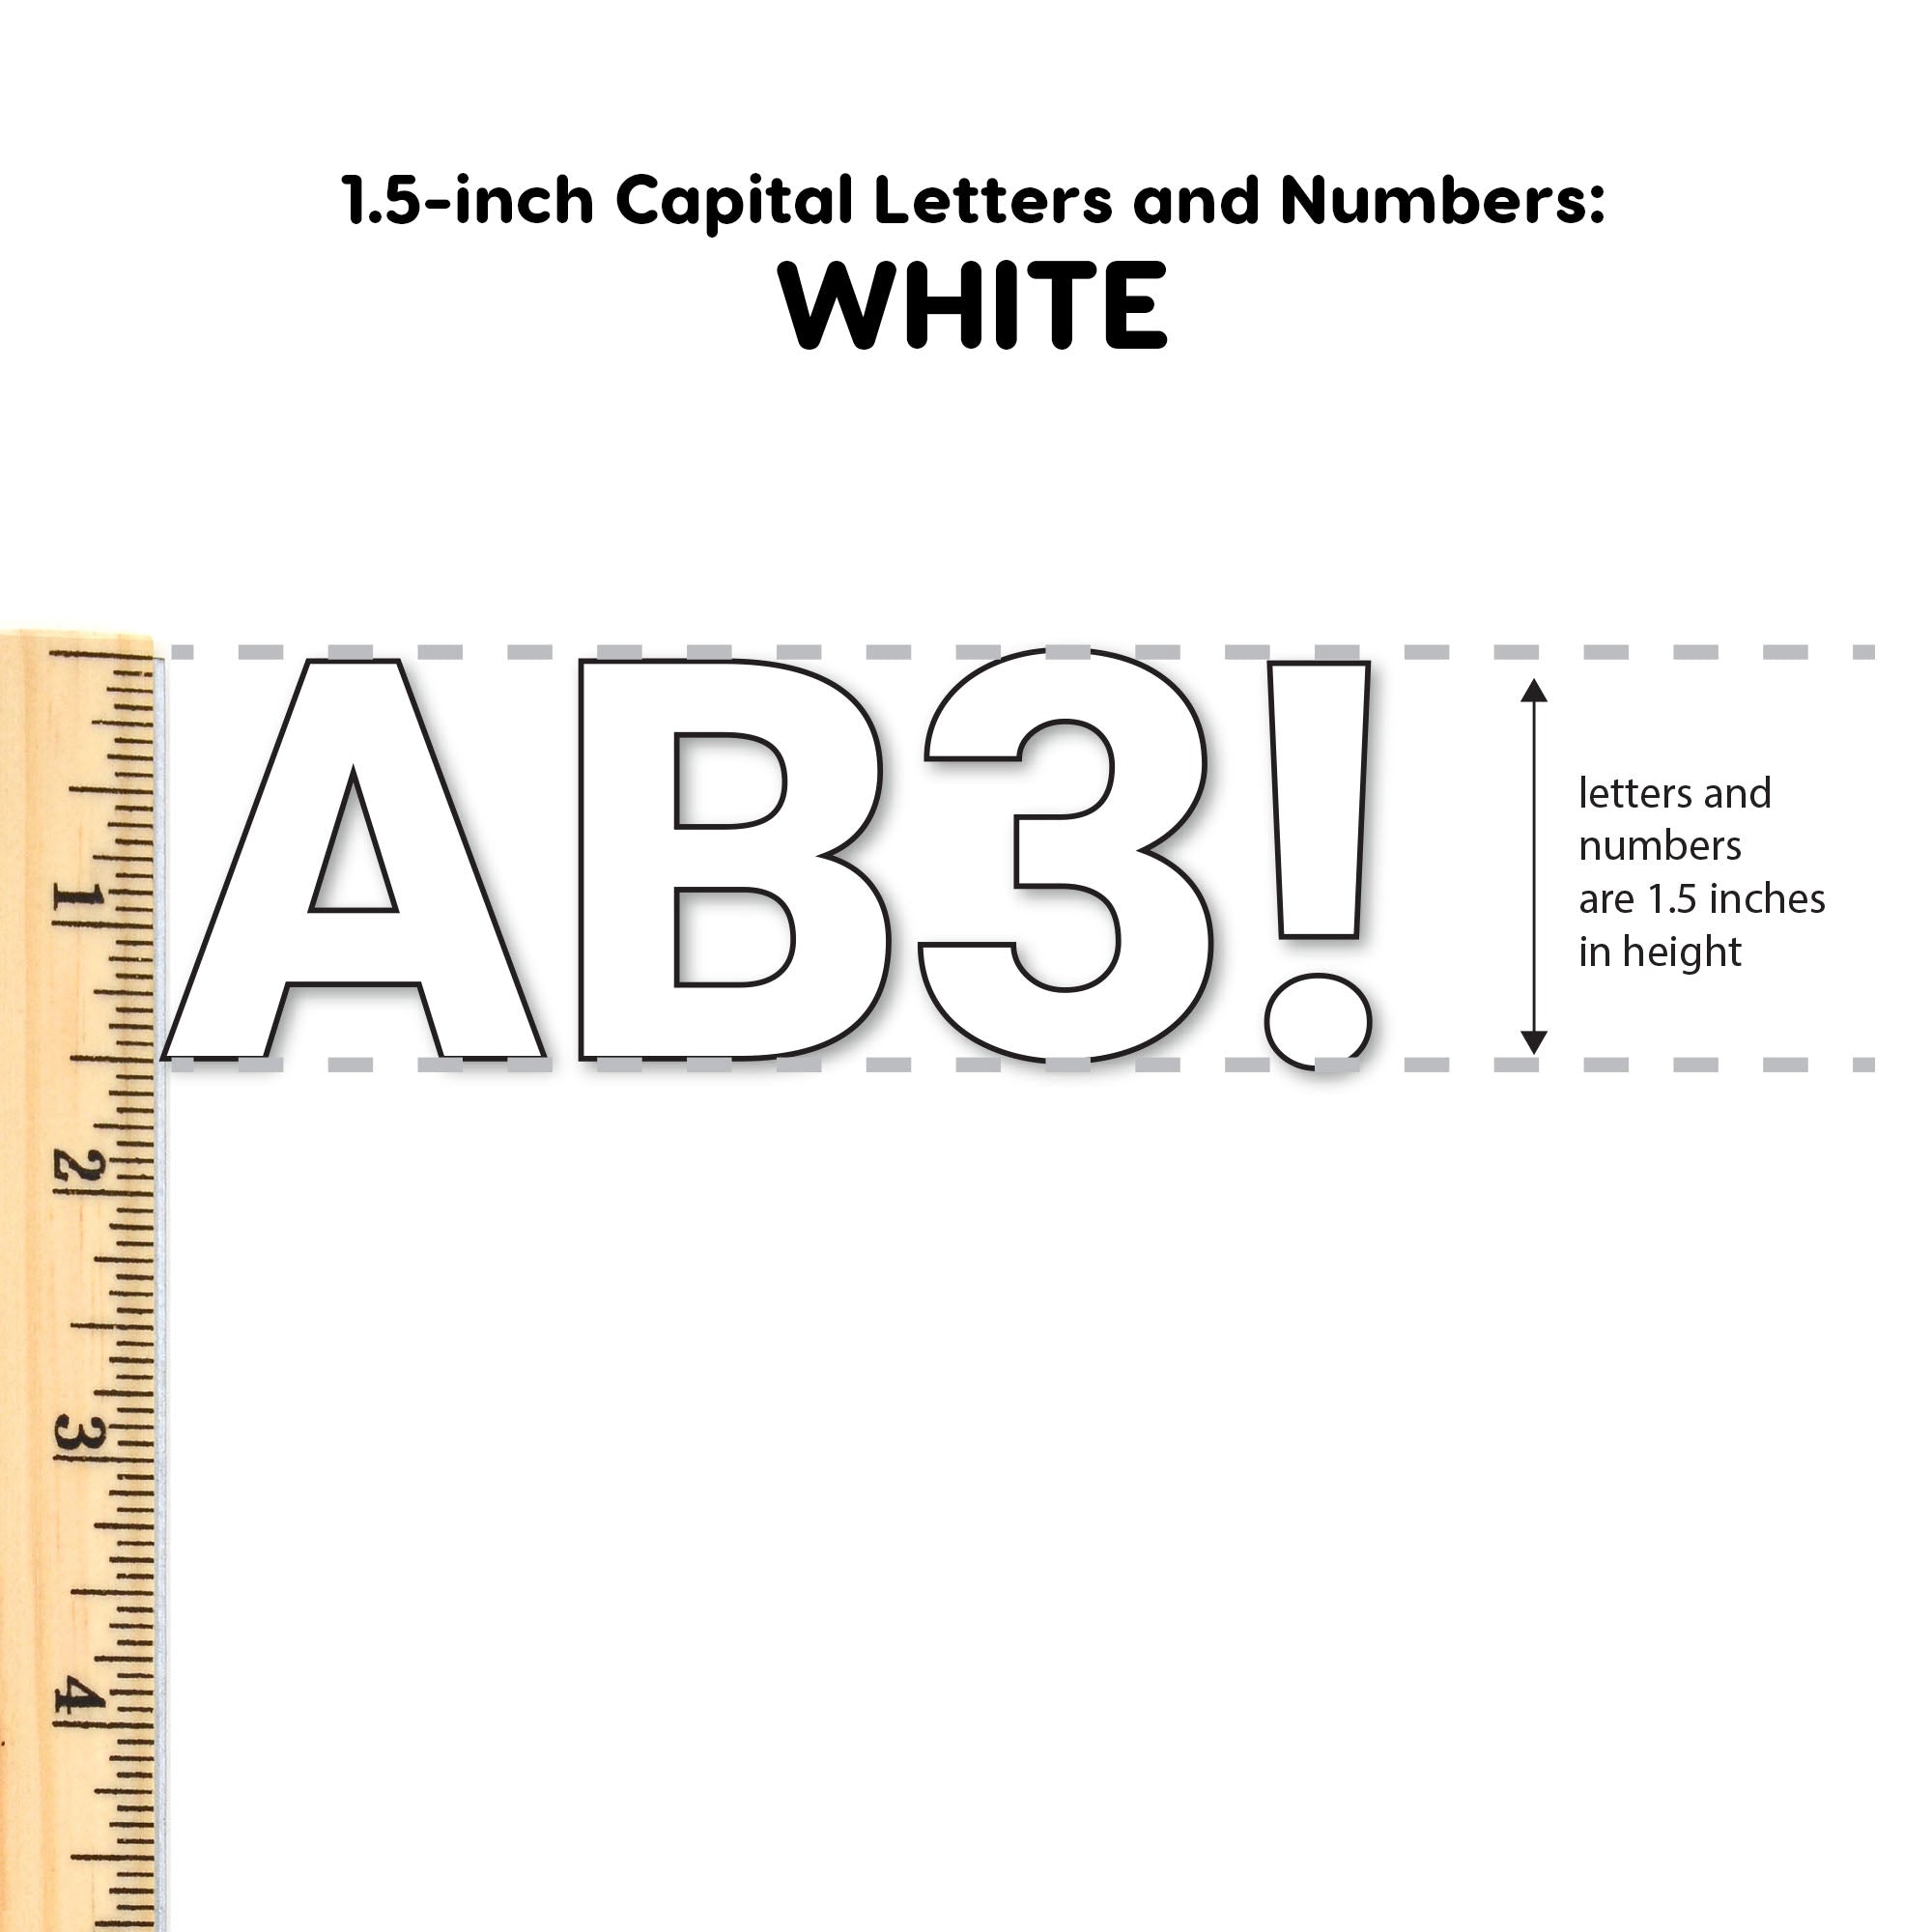 BRIGHT 1.5 in. Capital Alphabet Letters, Numbers, Punctuation – FreshCut  Crafts